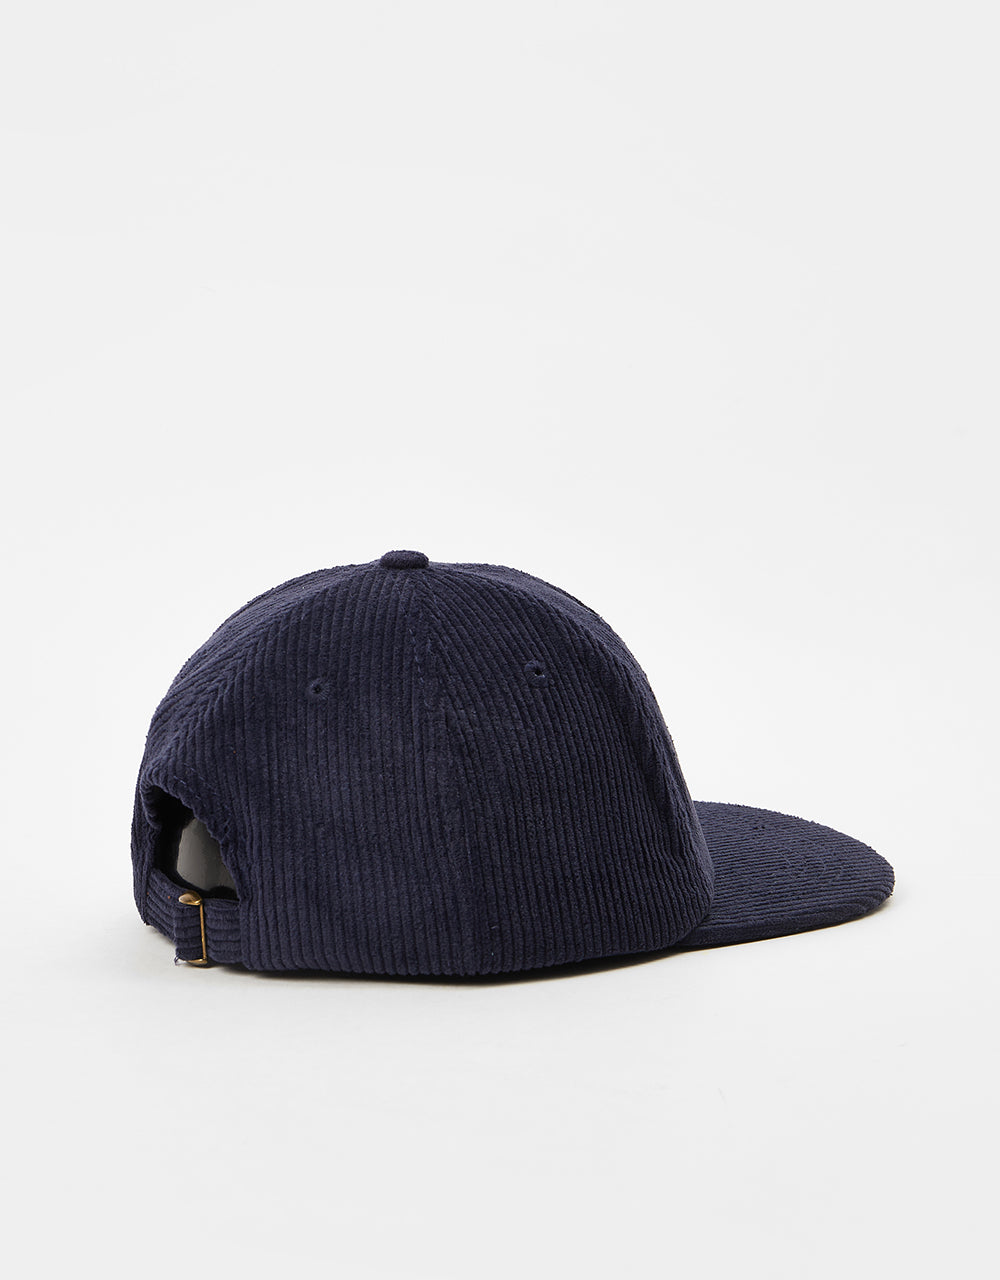 Route One Unstructured Cord 6 Panel Cap - Navy